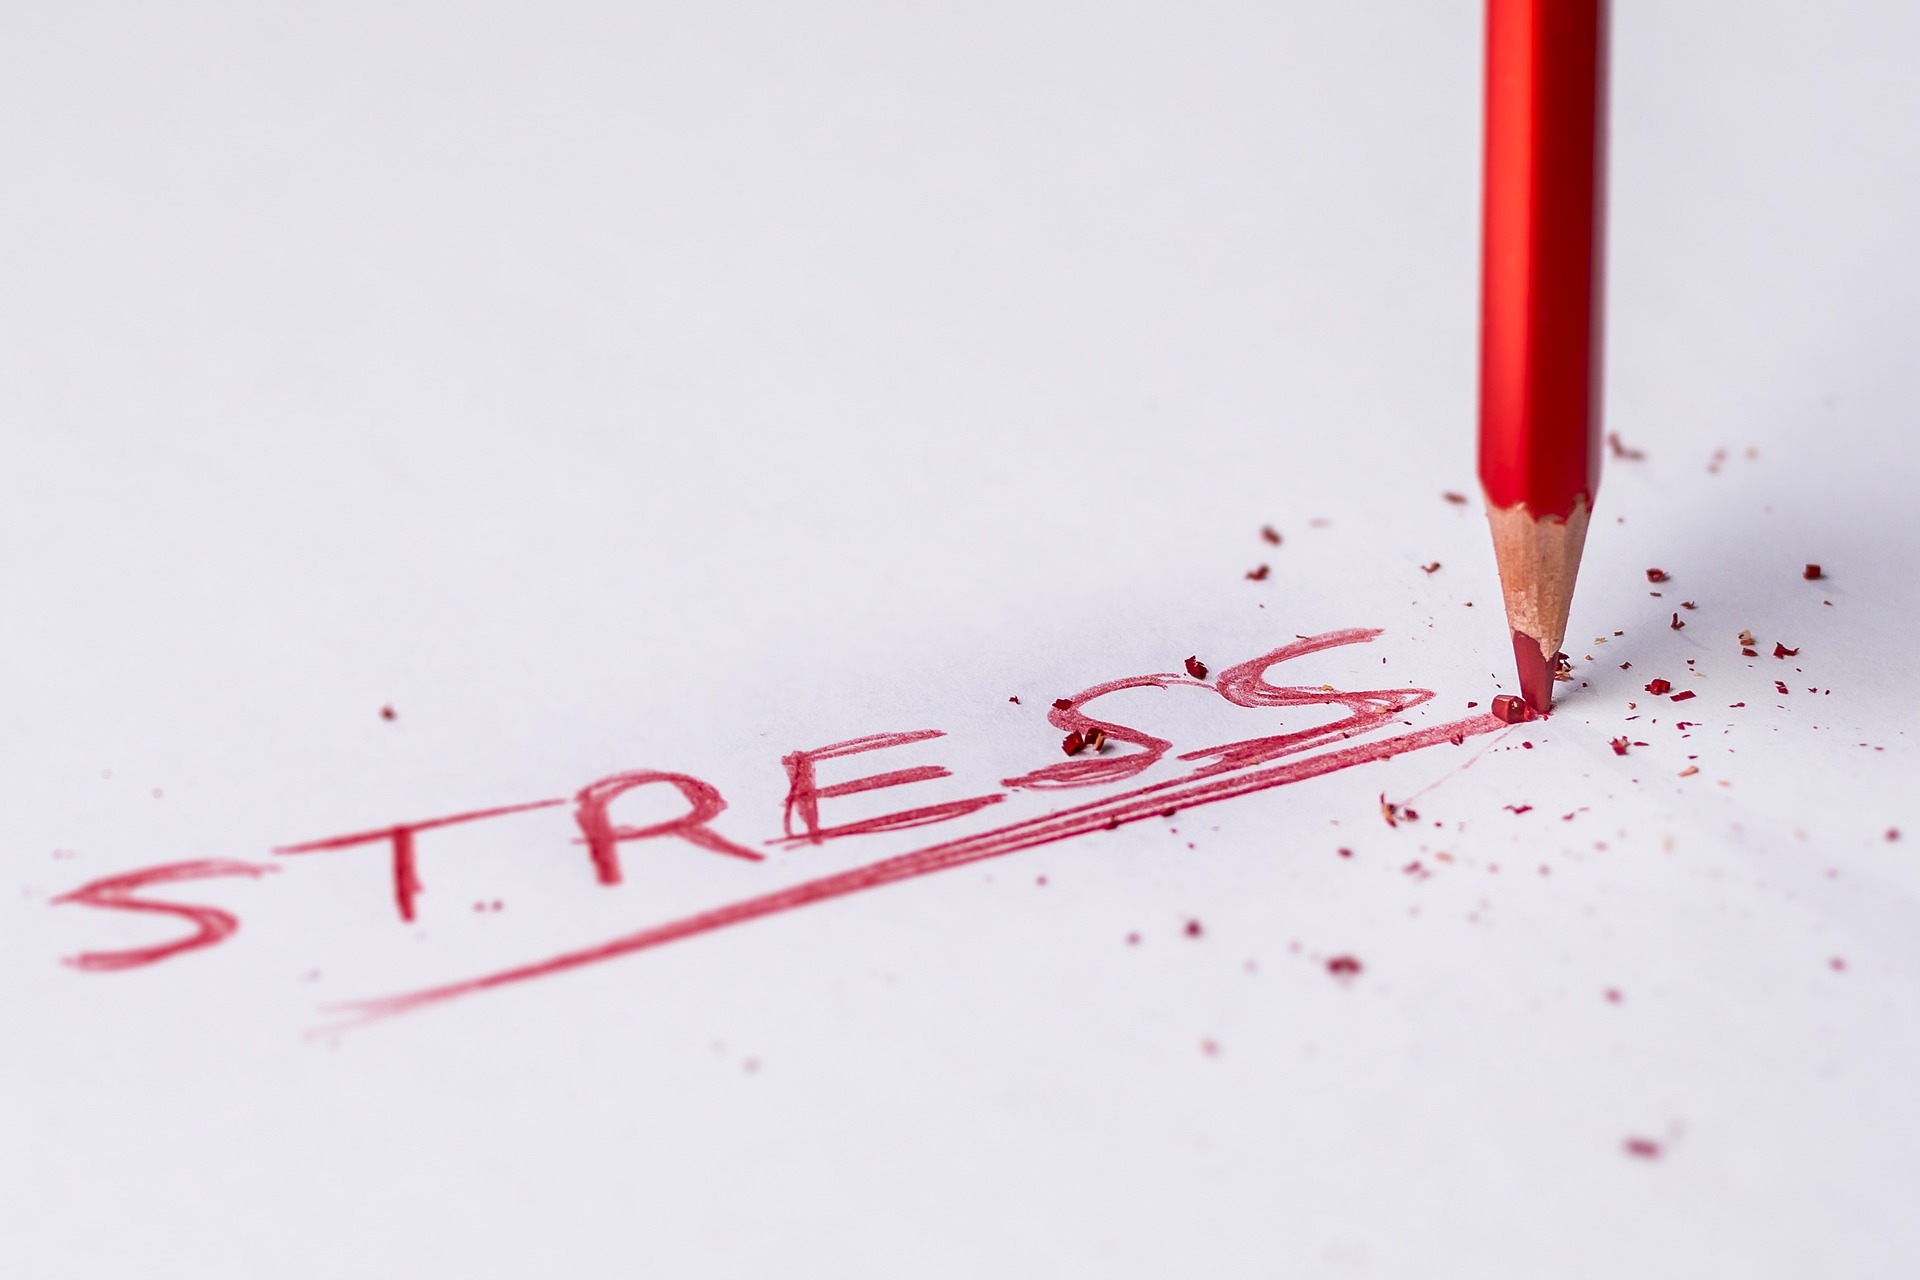 The word stress written in red pencil. The tip of the pencil is broken.